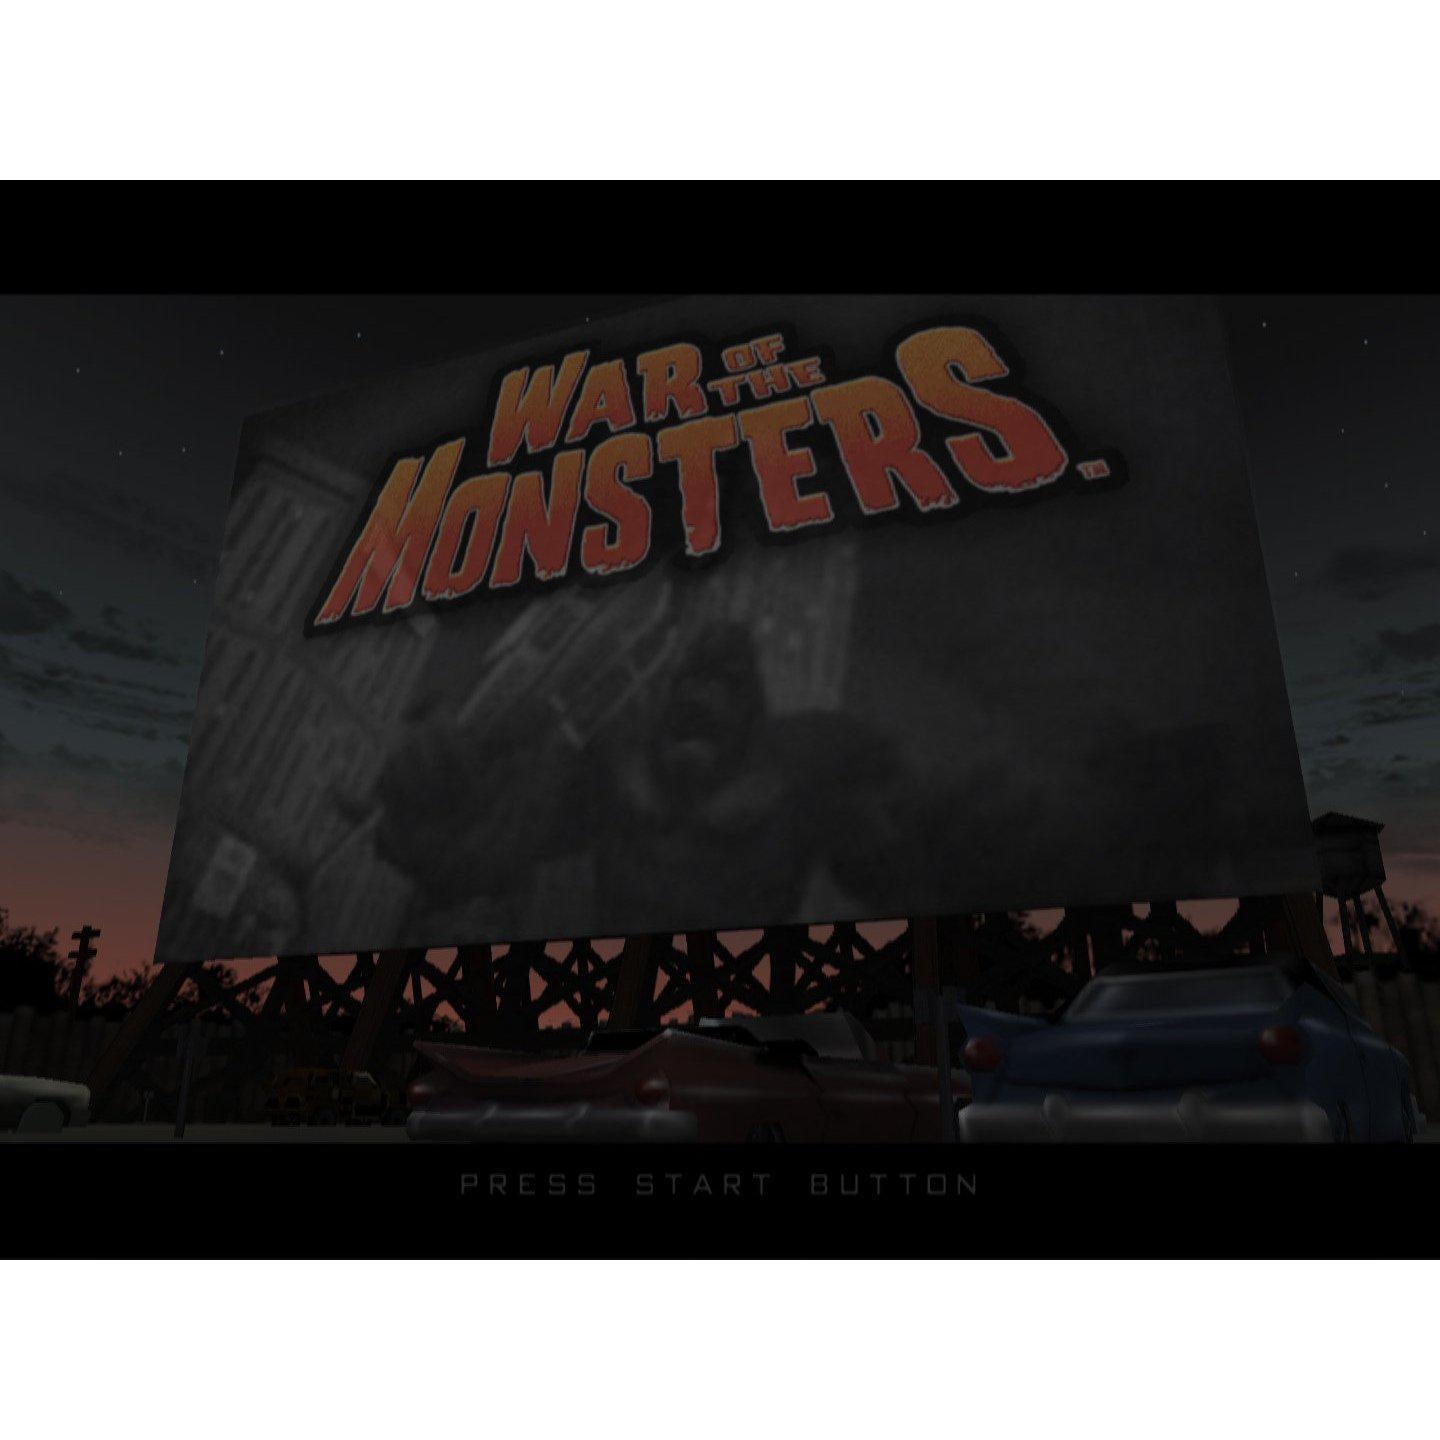 War of the Monsters - PlayStation 2 (PS2) Game Complete - YourGamingShop.com - Buy, Sell, Trade Video Games Online. 120 Day Warranty. Satisfaction Guaranteed.